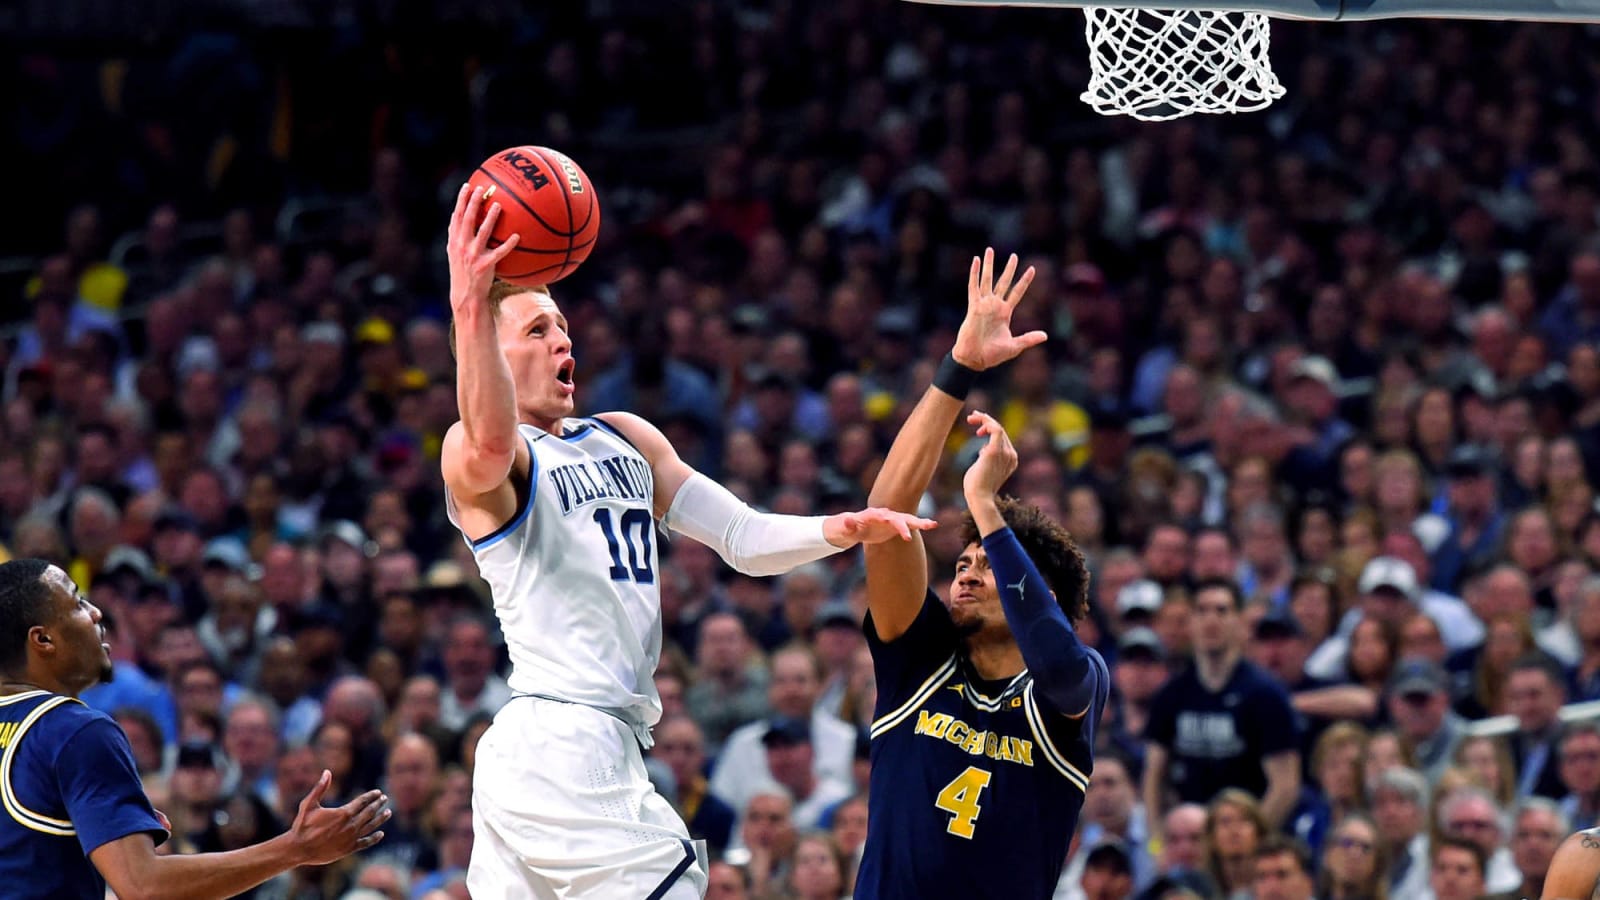 Twitter reacts to Donte DiVincenzo taking over title game